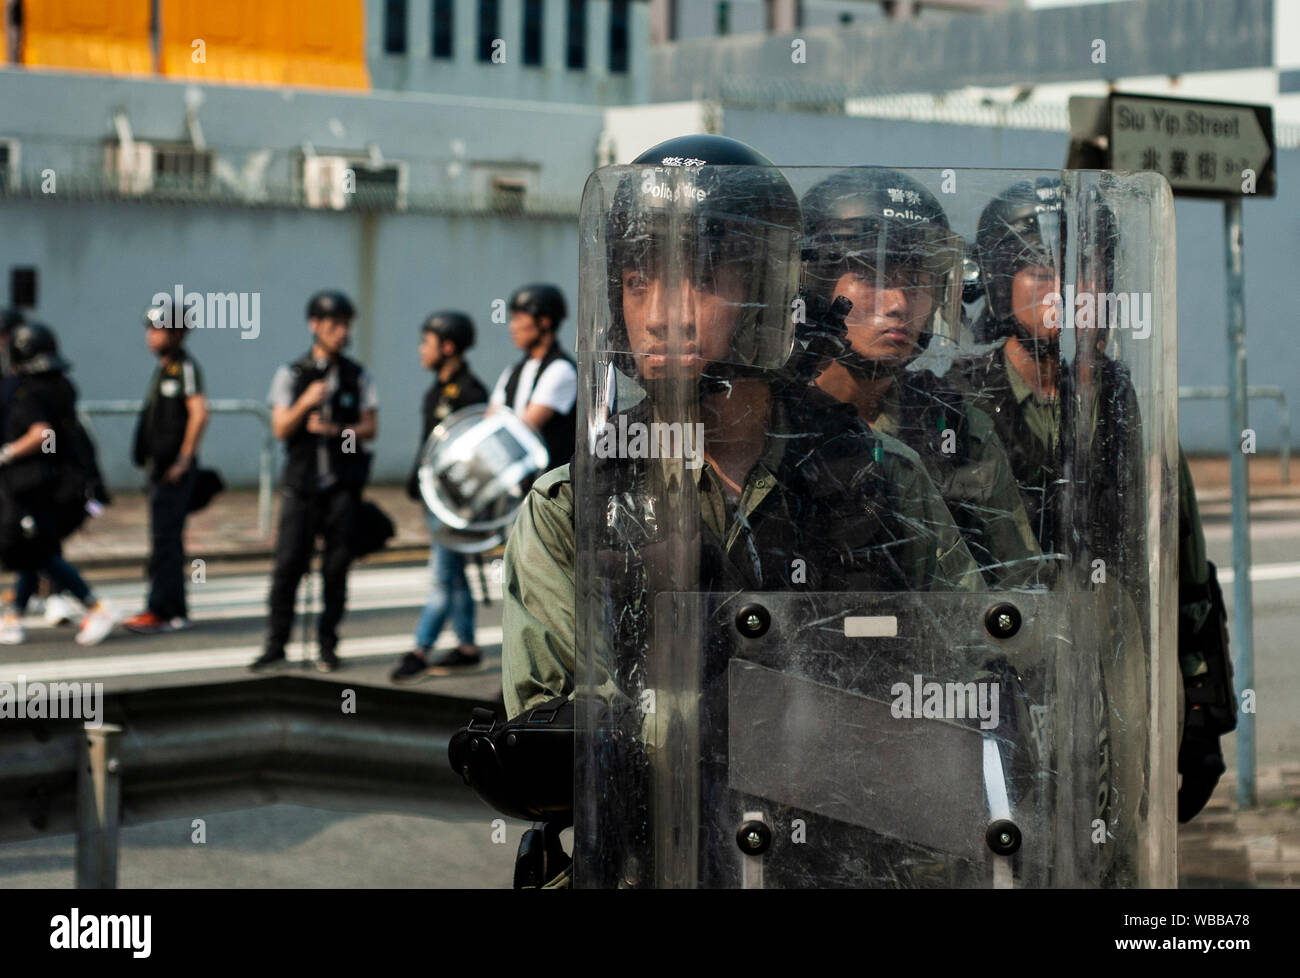 Hong Kong, China. 24th Aug, 2019. Riot police officers stand on guard during the protest in Kwun Tong.Mass demonstrations continues for one more weekend in Hong Kong which began in June 2019 over a now-suspended extradition bill to China. Credit: SOPA Images Limited/Alamy Live News Stock Photo